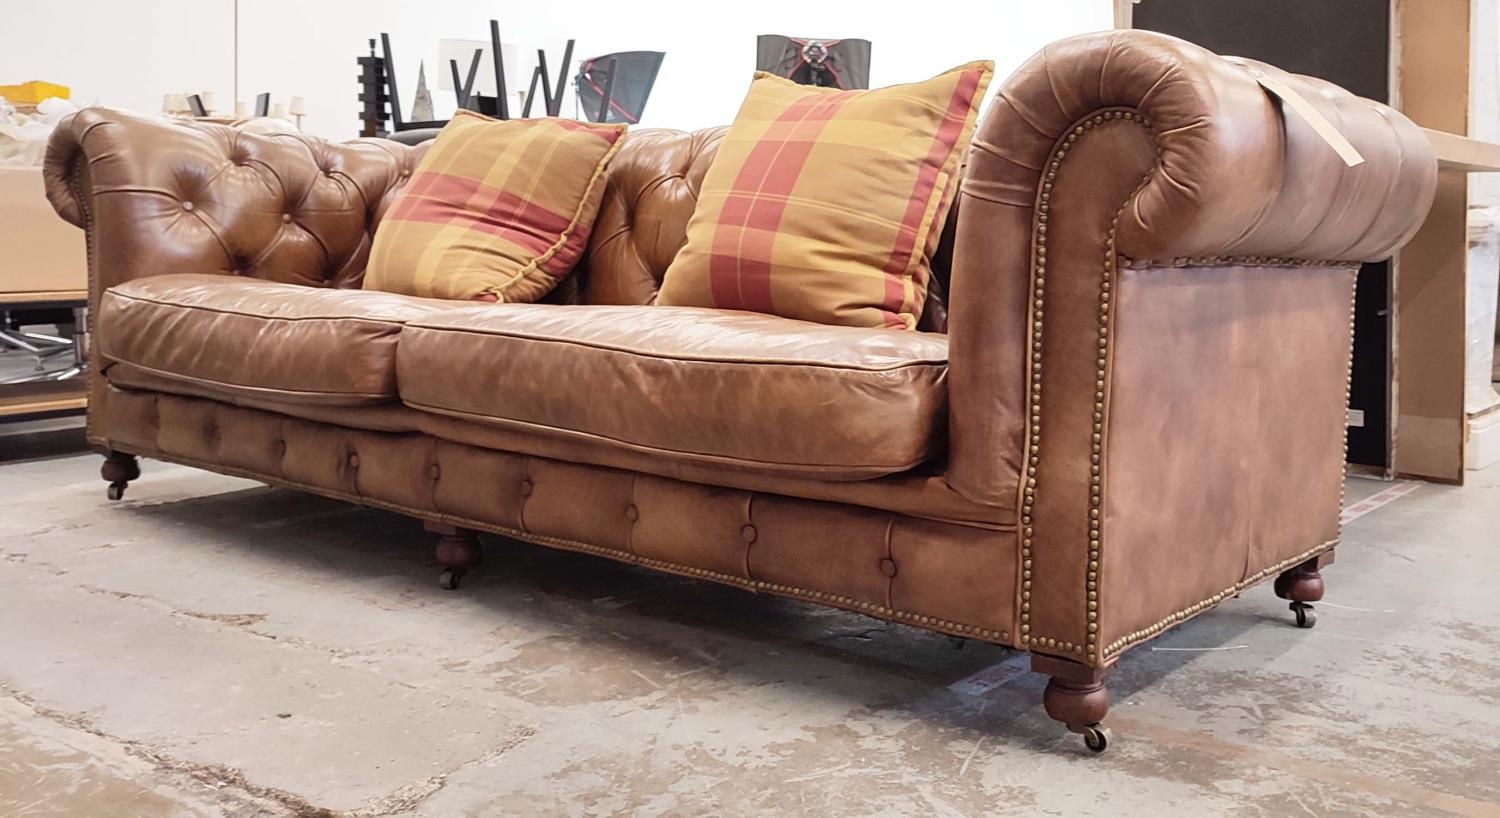 CHESTERFIELD SOFA, in buttoned brown leather, 95cm D x 80cm H x 255cm W, with two cushions. - Image 2 of 8